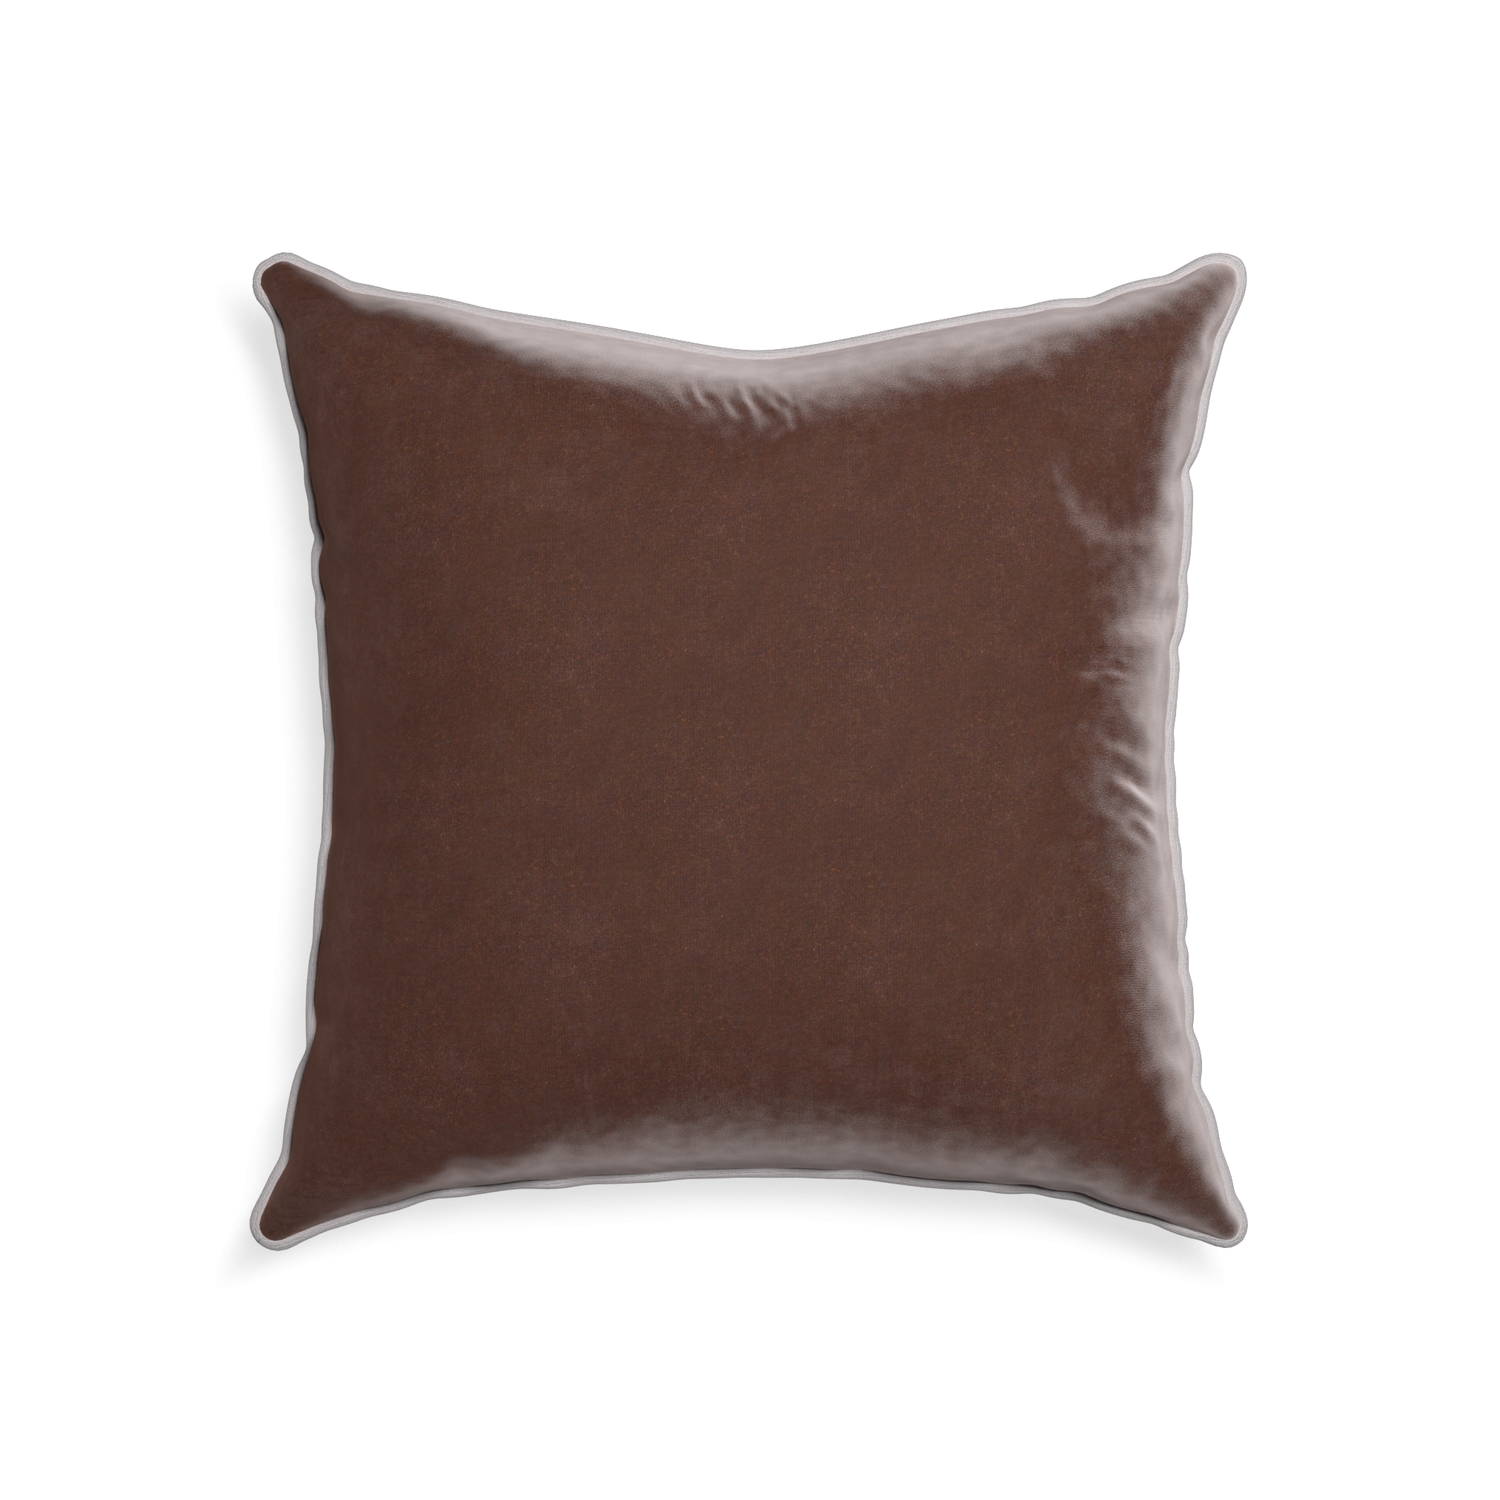 22-square walnut velvet custom pillow with pebble piping on white background